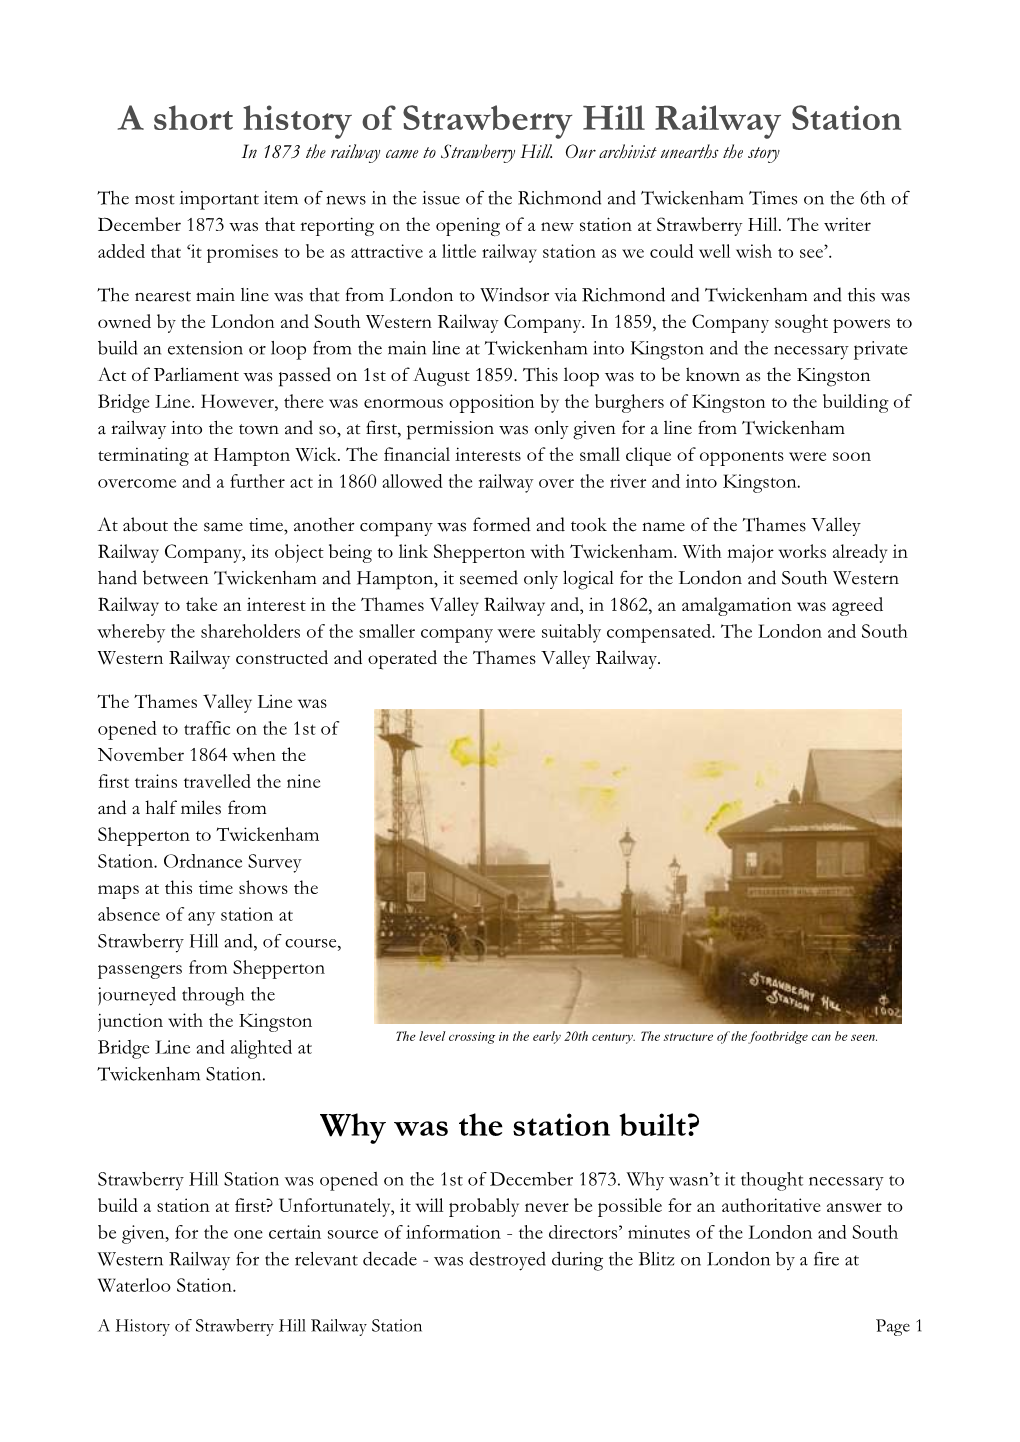 A Short History of Strawberry Hill Railway Station in 1873 the Railway Came to Strawberry Hill